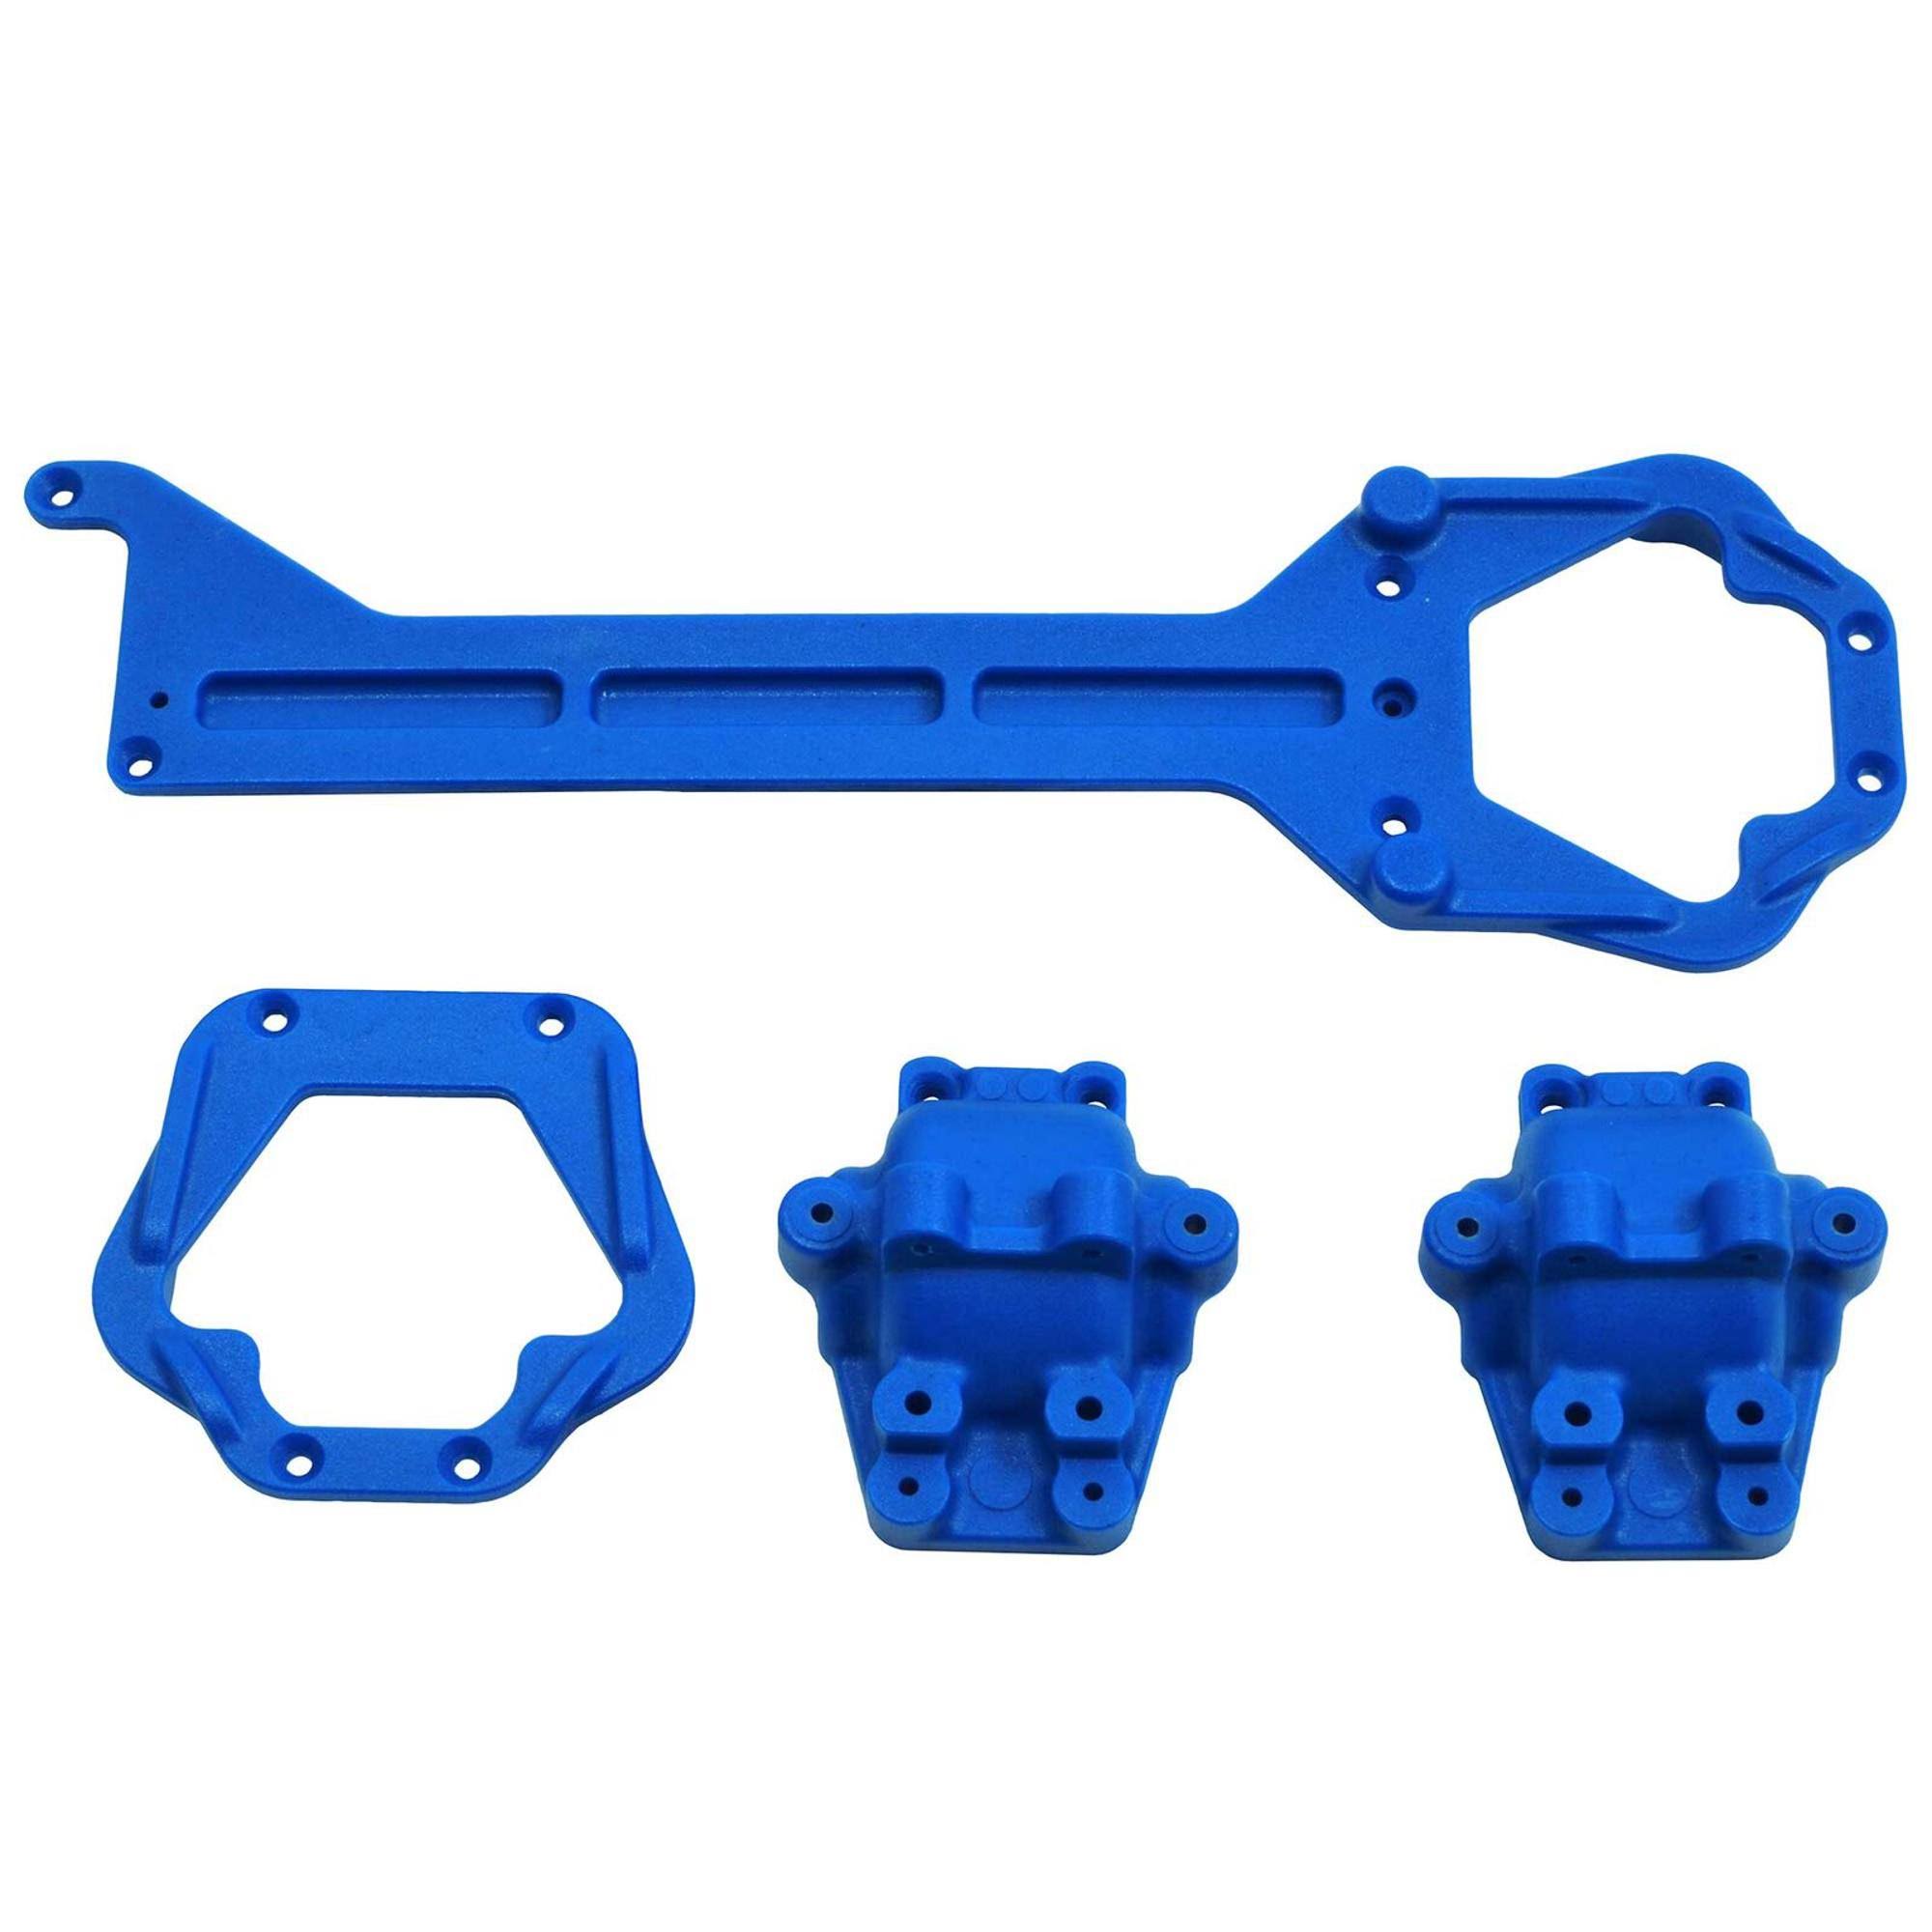 RPM Front And Rear Upper Chassis And Differential Covers - Blue